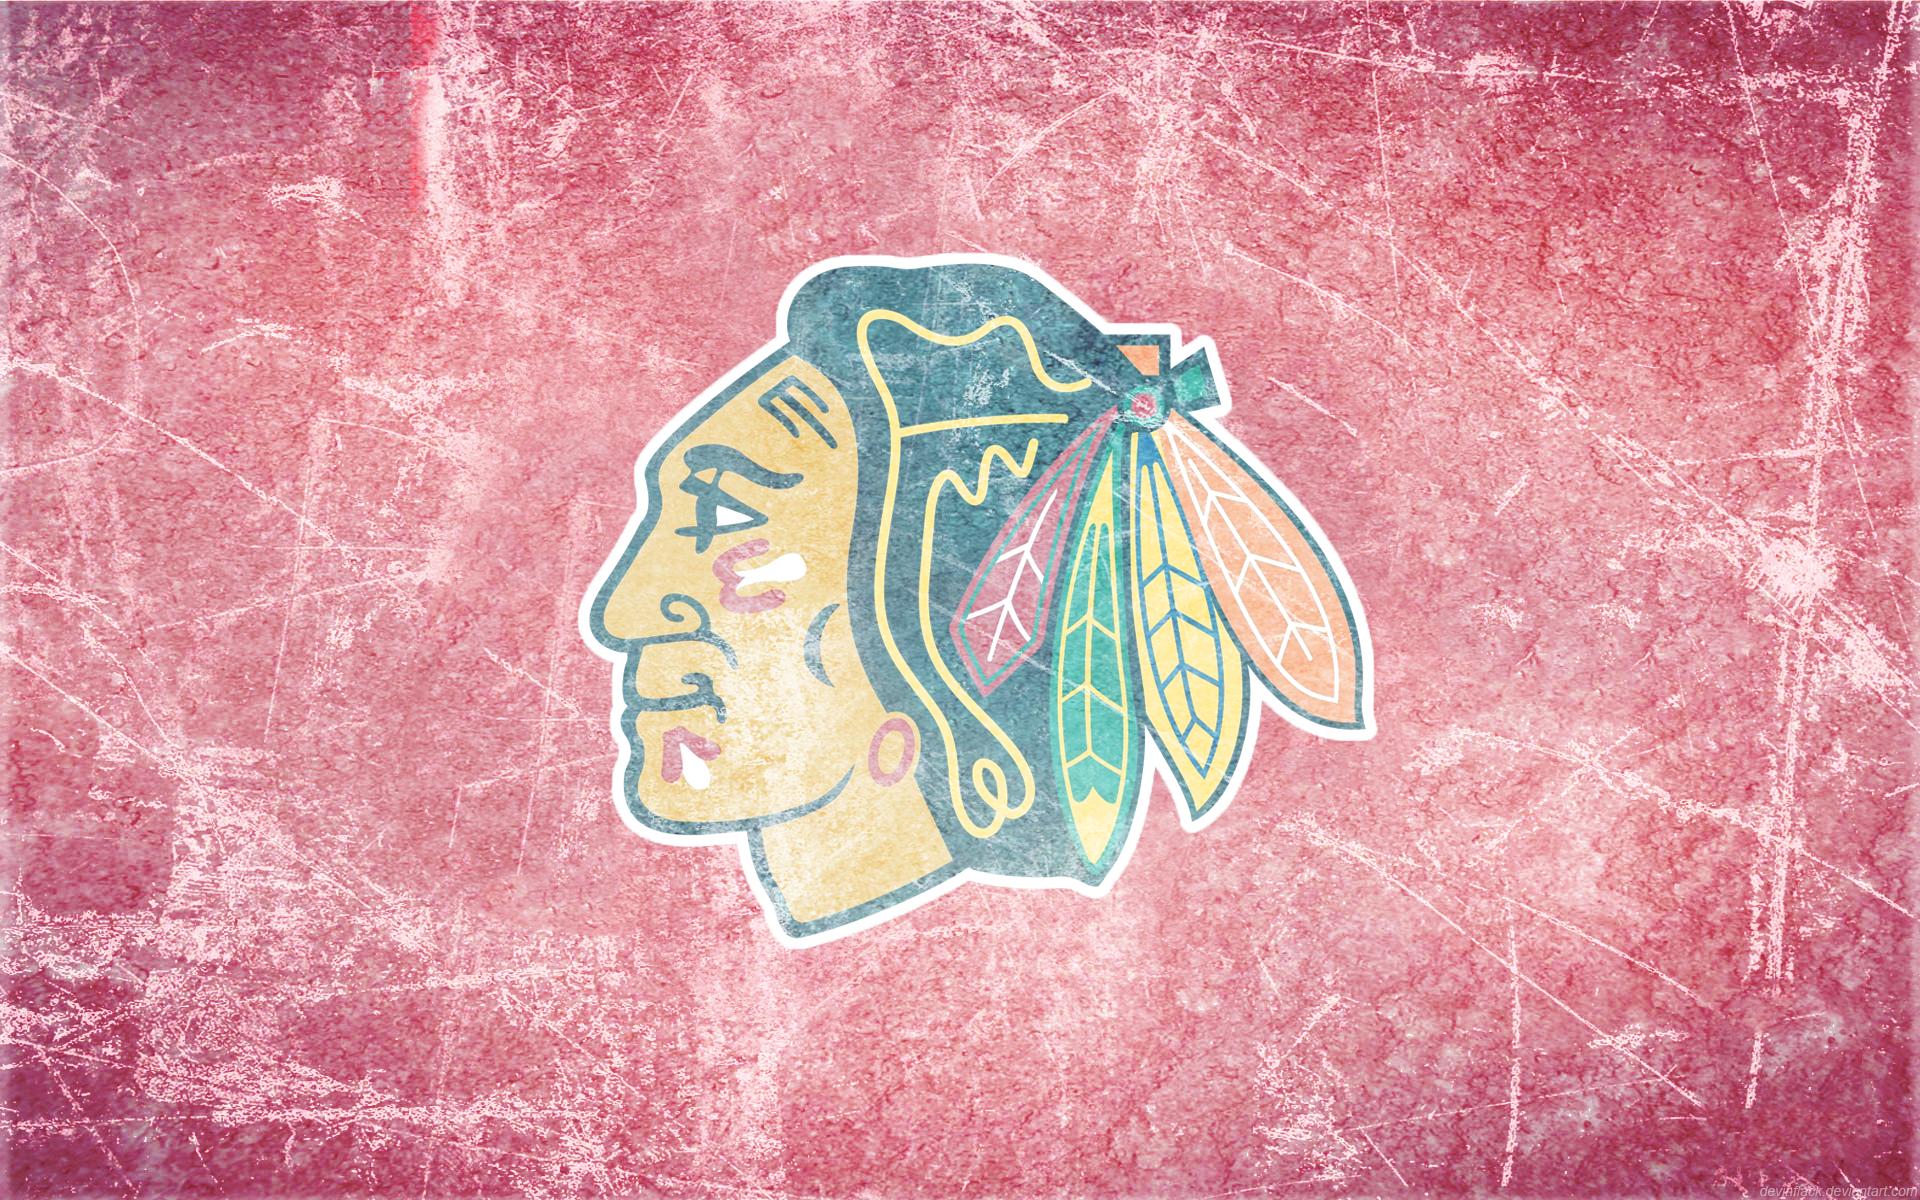 Free Chicago Blackhawks Wallpapers - Wallpaper Cave